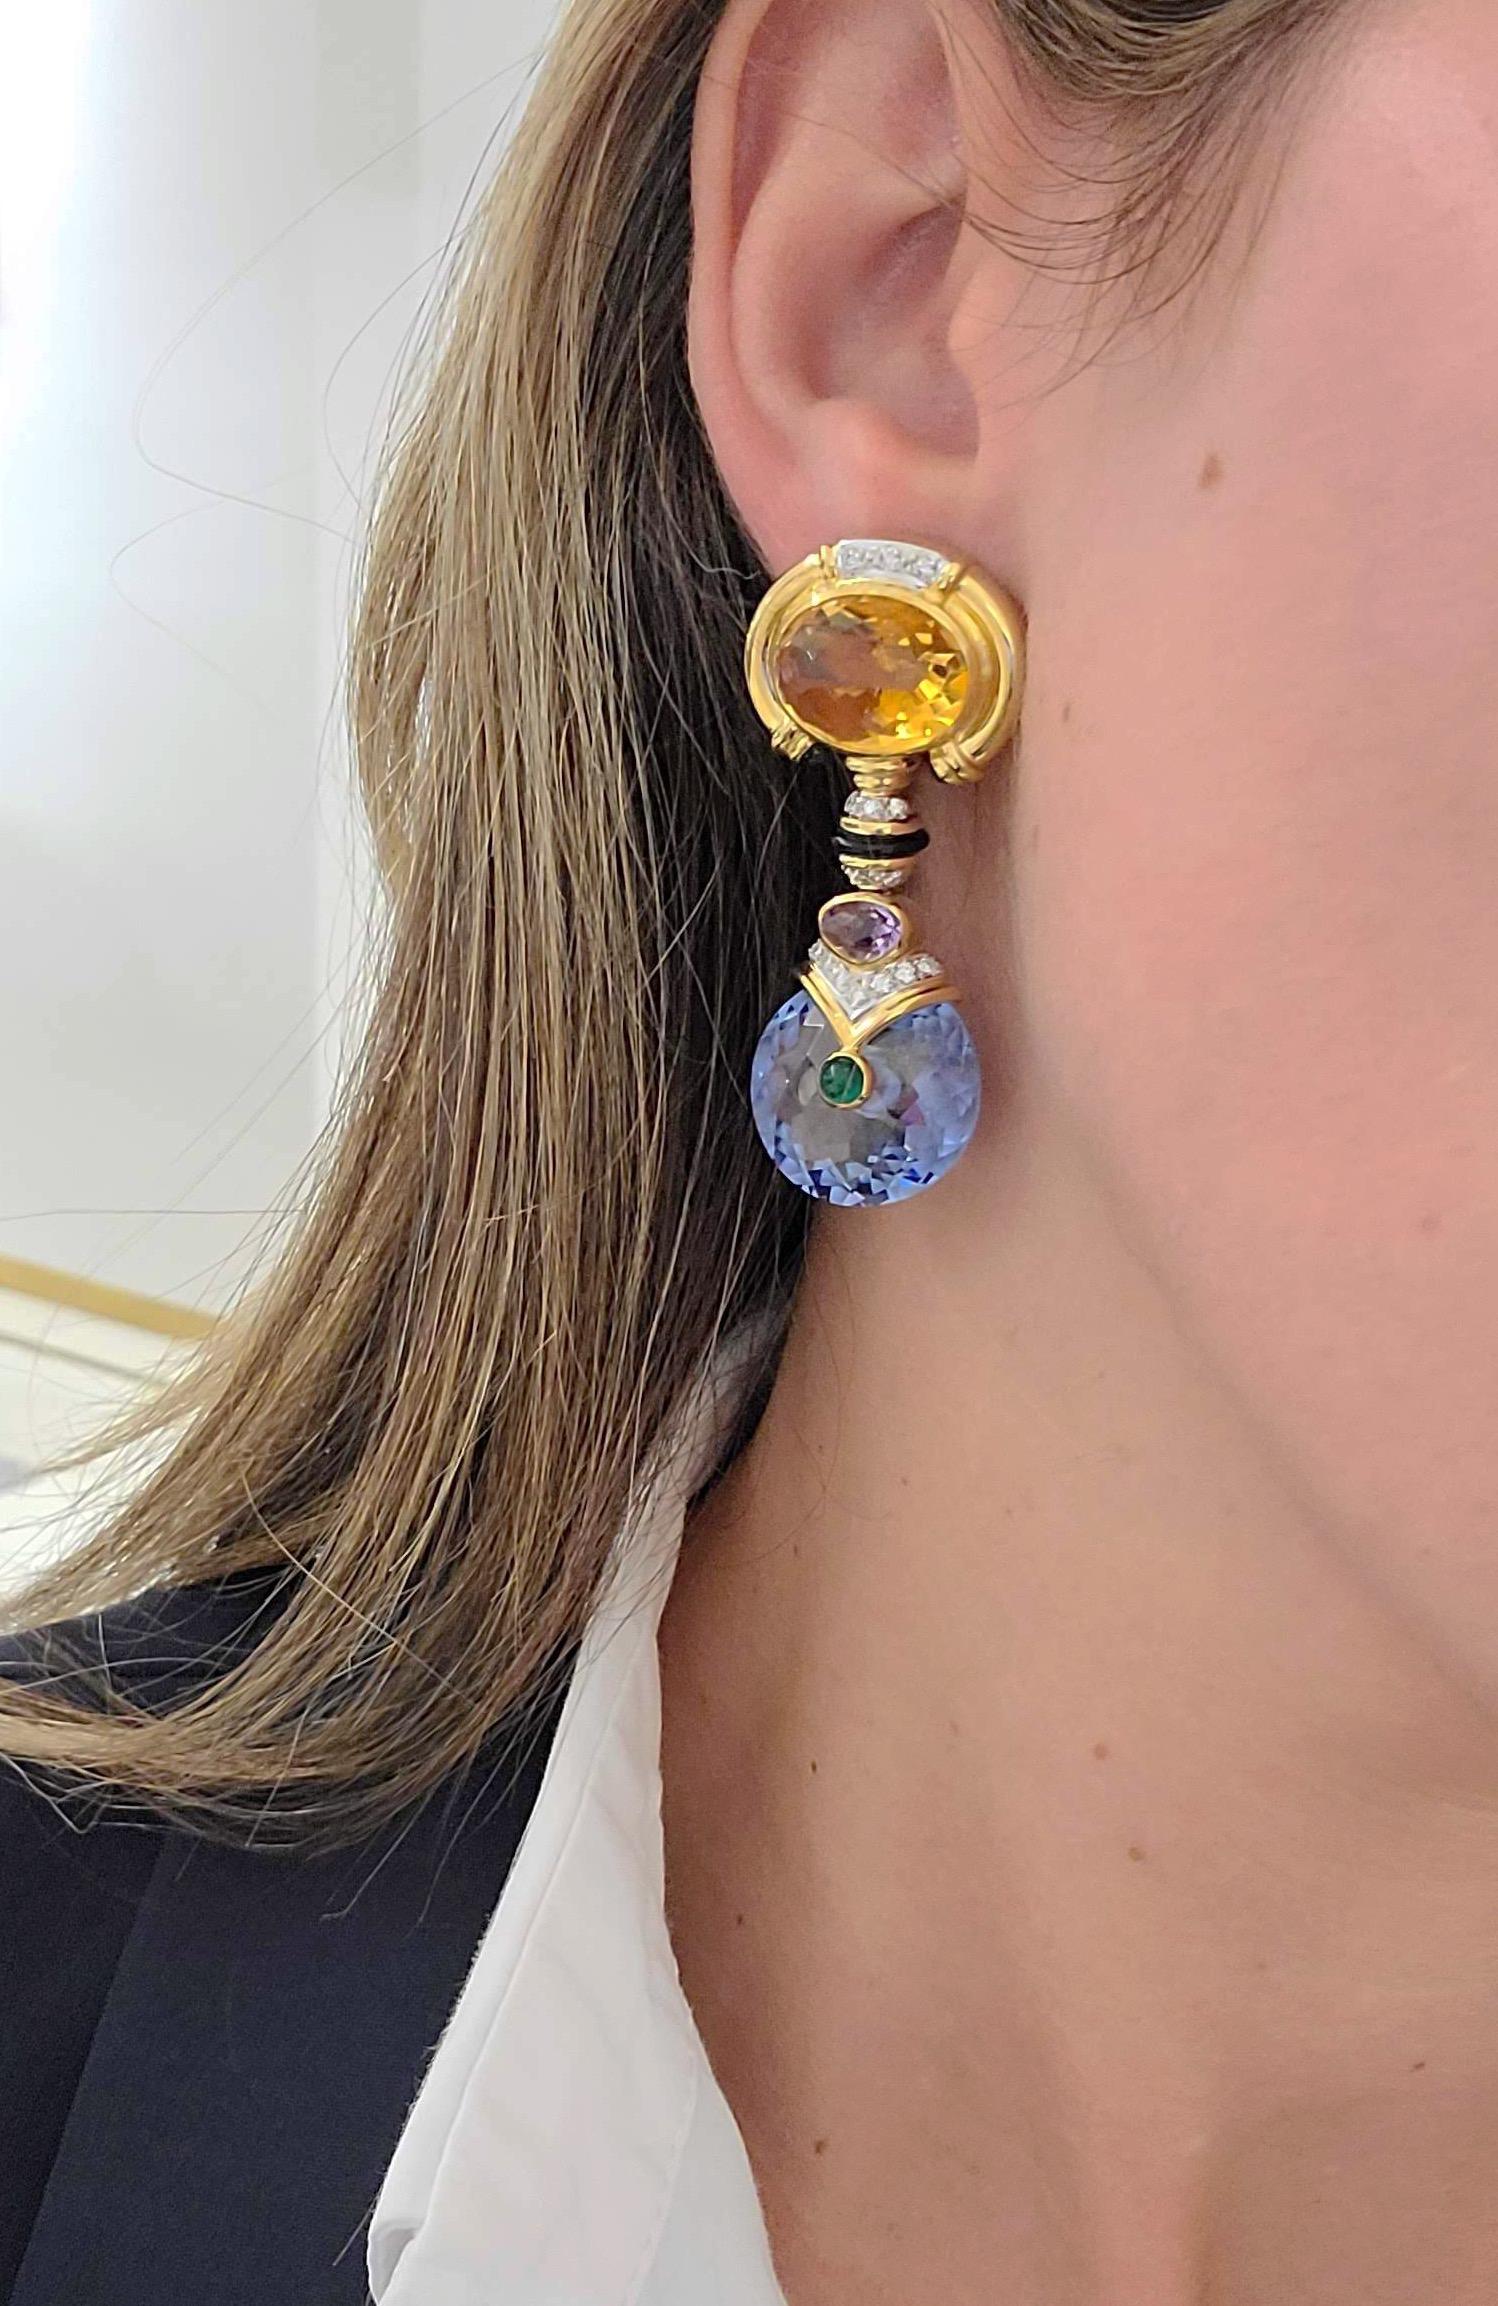 These amazing 18 karat yellow gold earrings were designed for Cellini in 1993. The tops of the earrings are set with a large oval citrine, which has been accented with diamonds and emerald cabochons. The drop part of the earrings are set with bezel